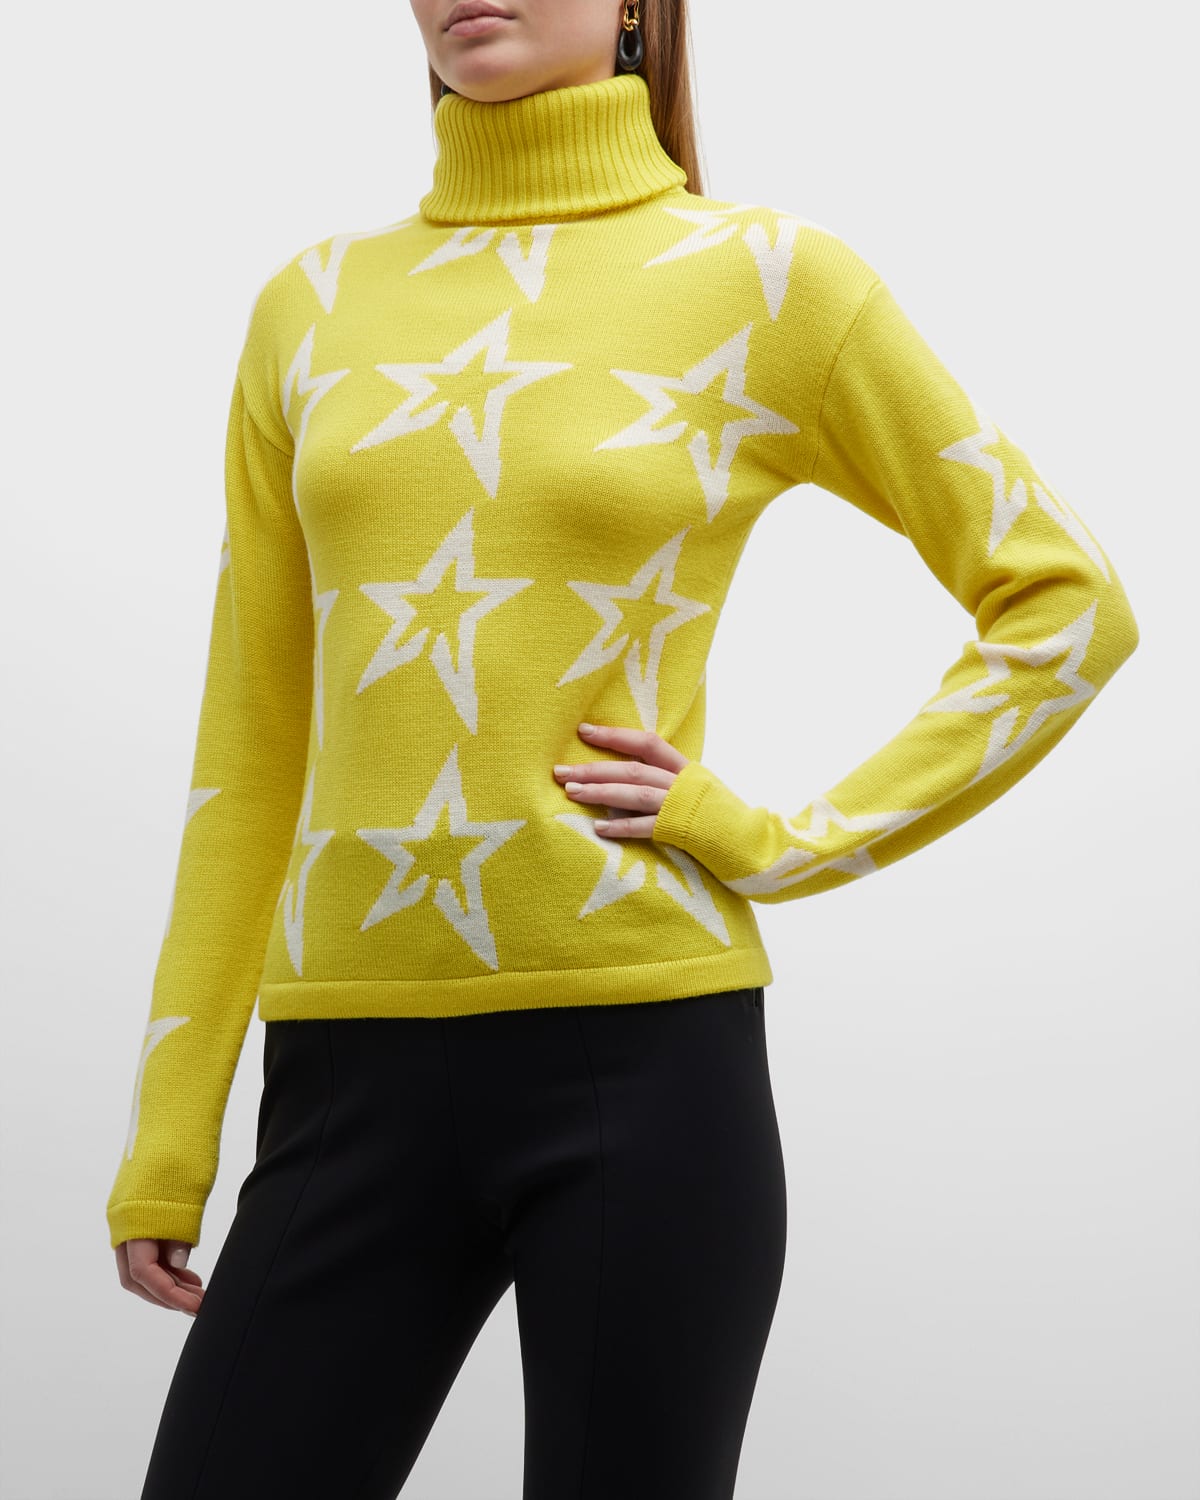 PERFECT MOMENT STAR DUST LOGO KNIT SWEATER